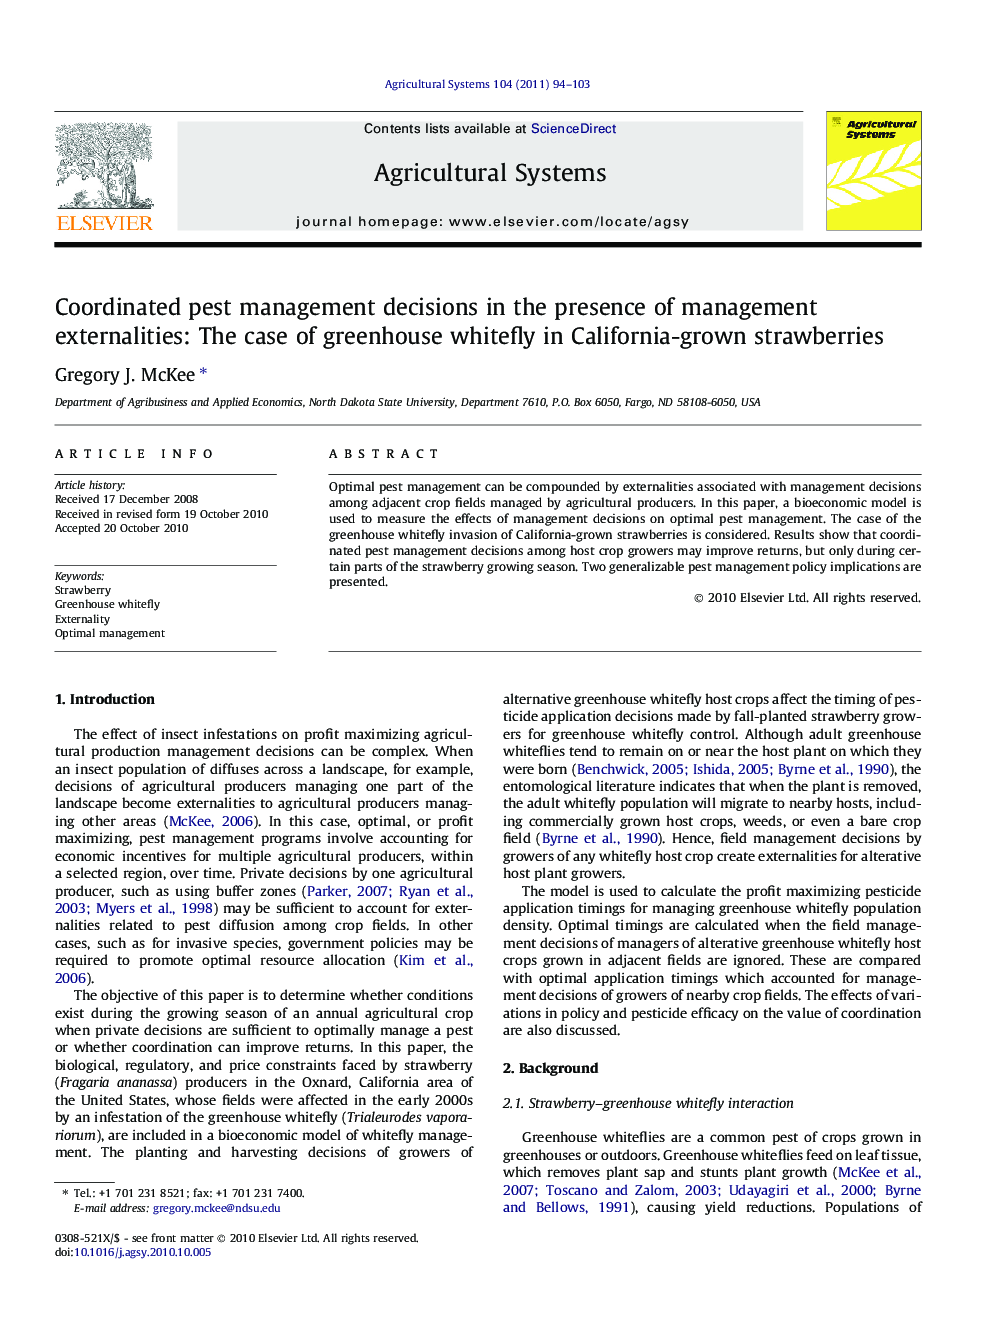 Coordinated pest management decisions in the presence of management externalities: The case of greenhouse whitefly in California-grown strawberries